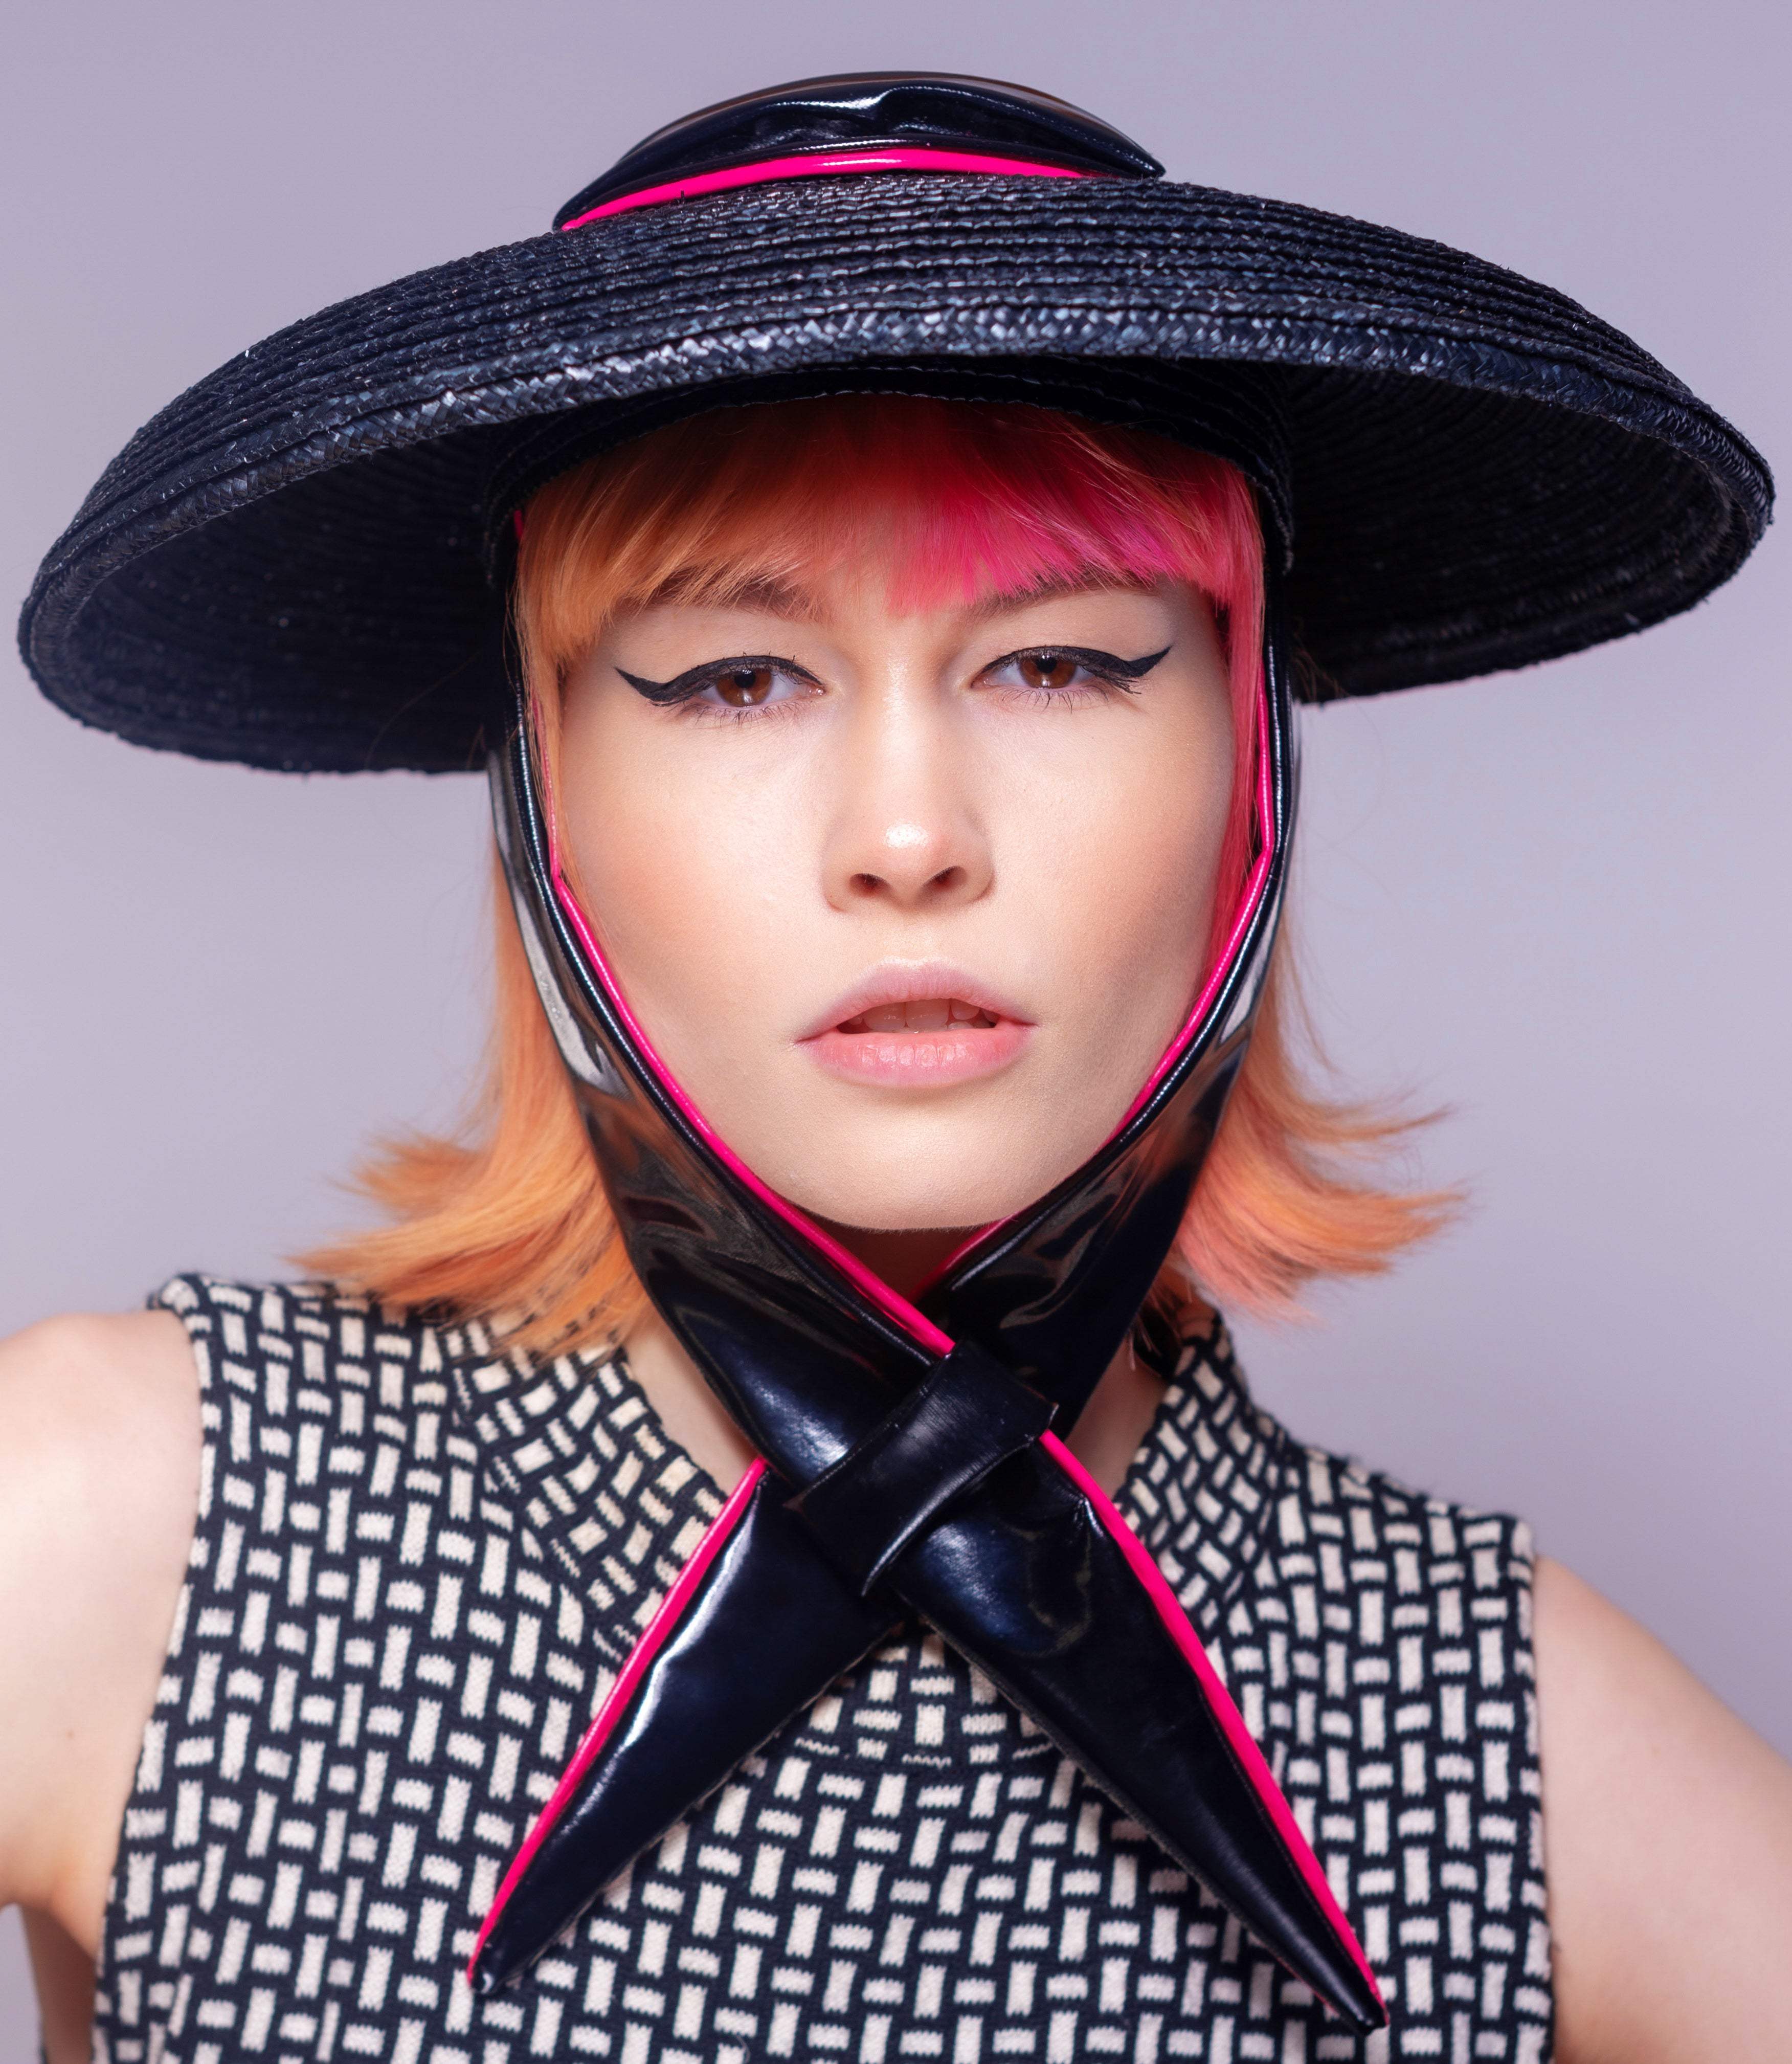 Black Straw 'Dior' Style Hat with PVC Scarf